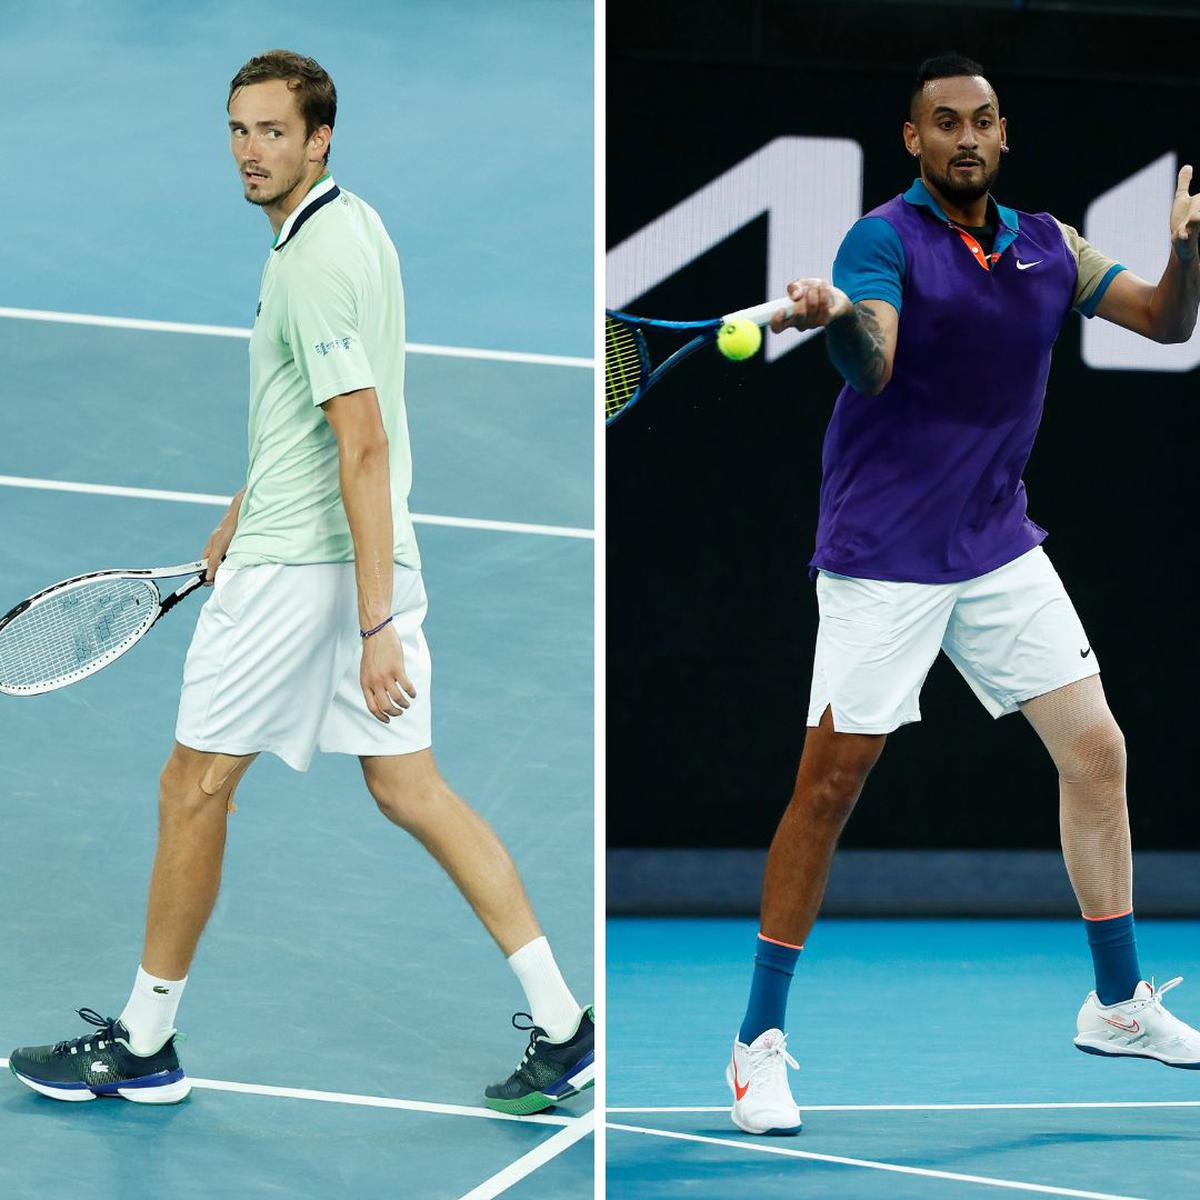 Medvedev, Kyrgios withdraw from Washington Open due to injury